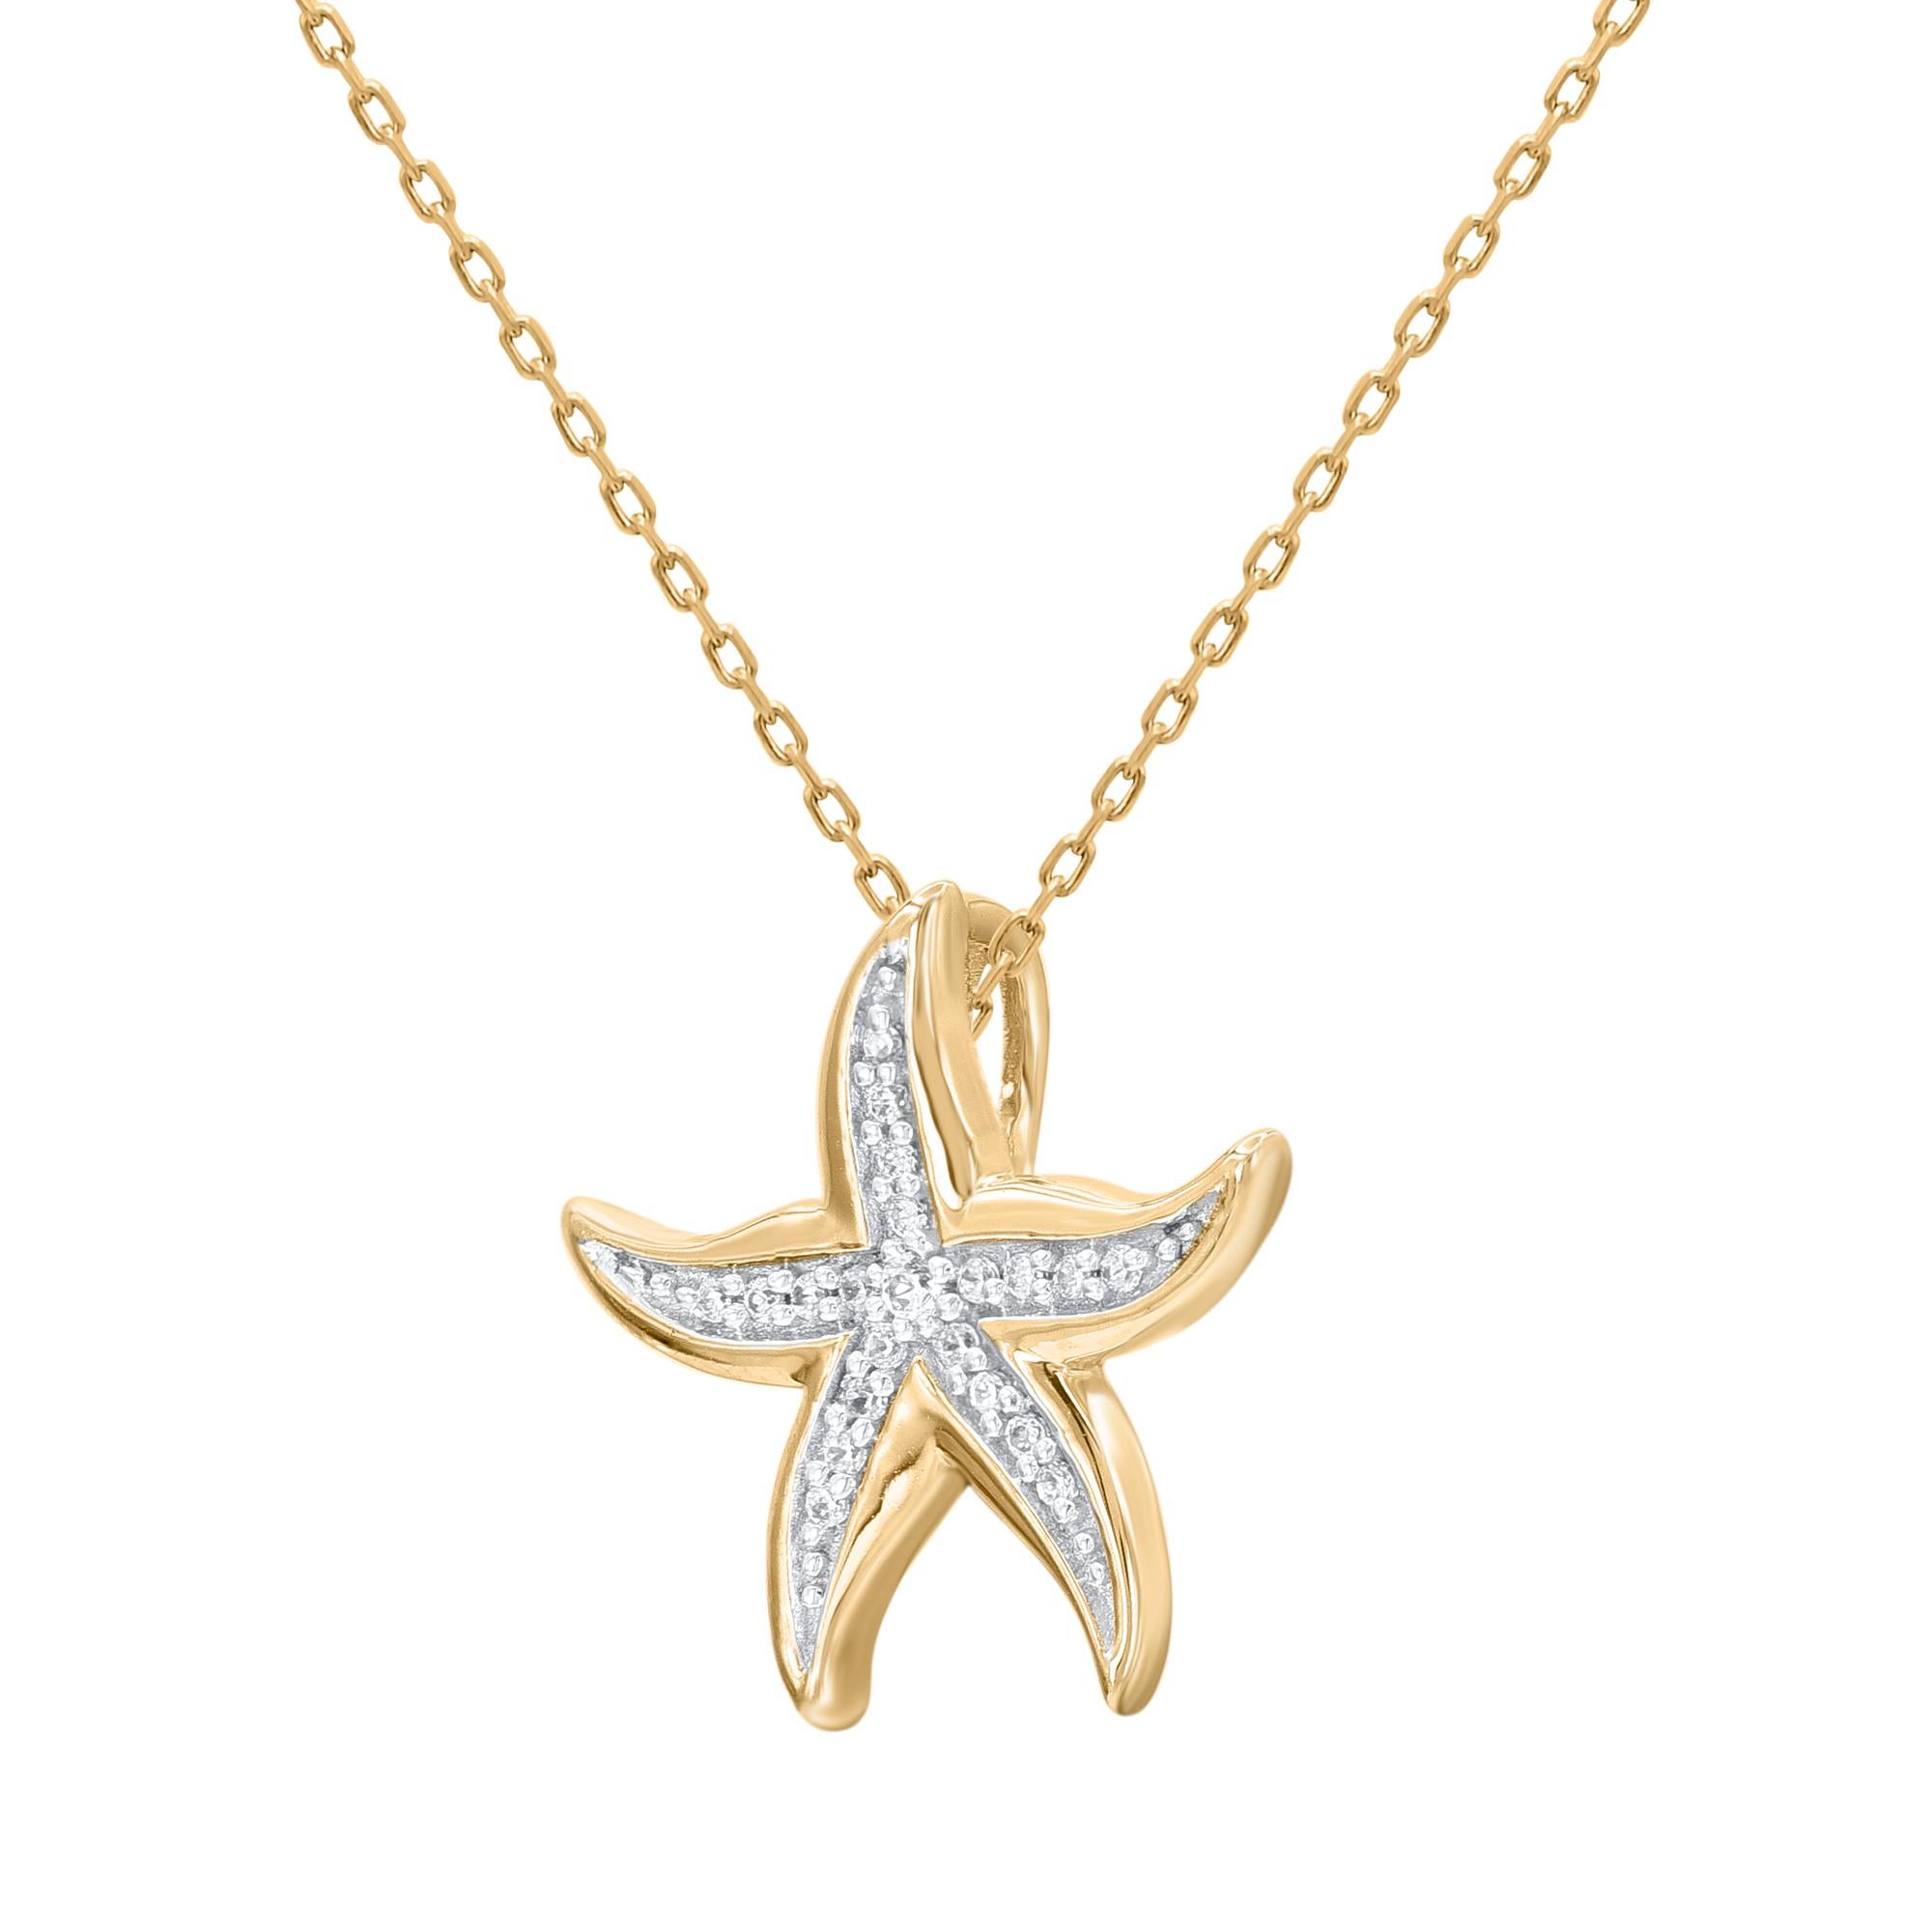 Give your casual look a fun beachy vibe with this starfish pendant necklace. These pendants are studded with 21 single cut and brilliant cut natural diamonds in pave setting and pendant crafted in 18 karat yellow gold. Total diamond weight is 0.05